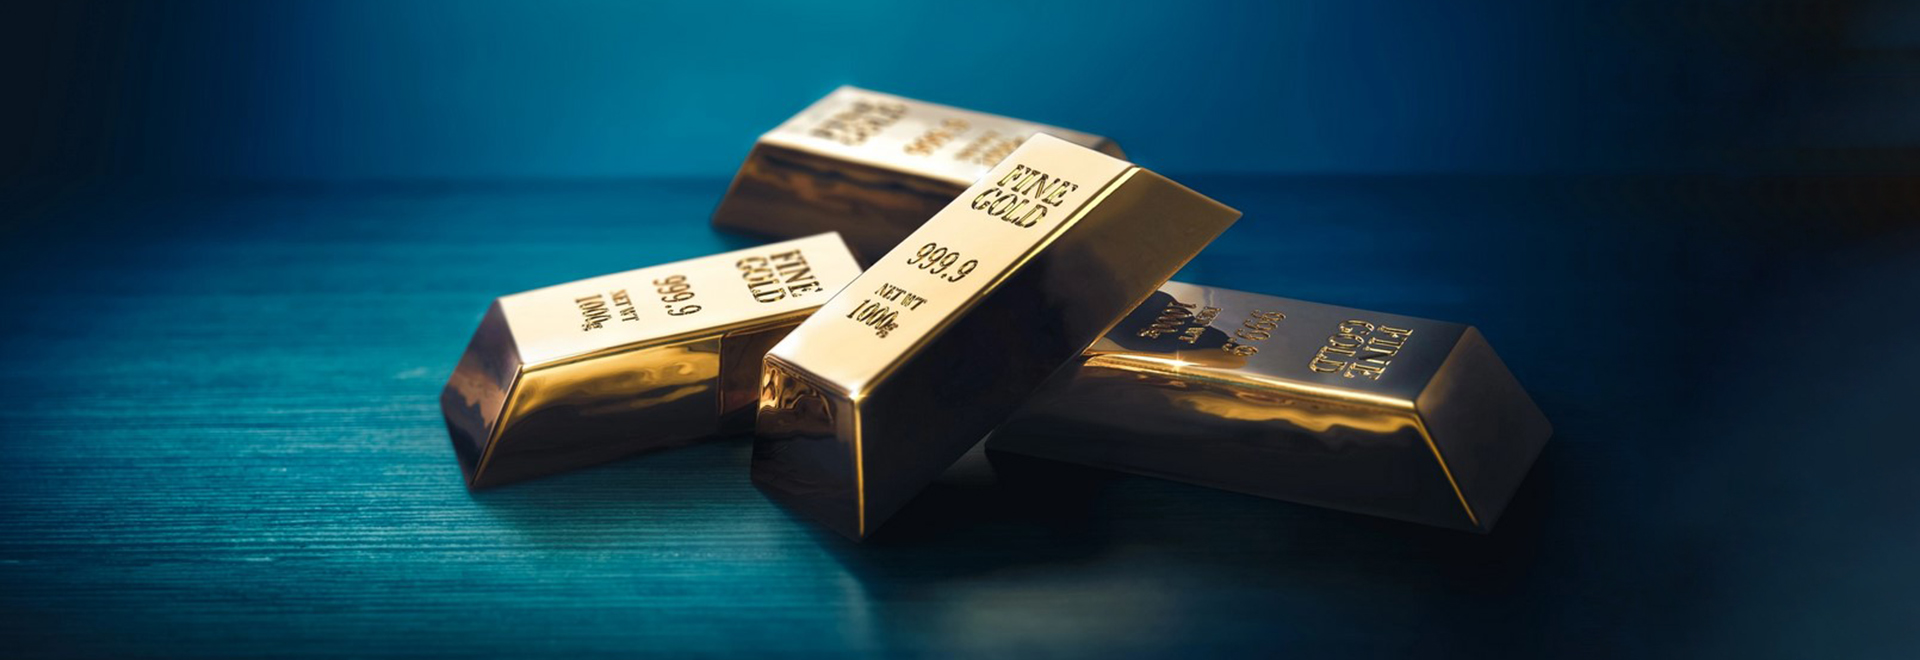 Gold Hovering Mark Potential Shifts In Forex Markets